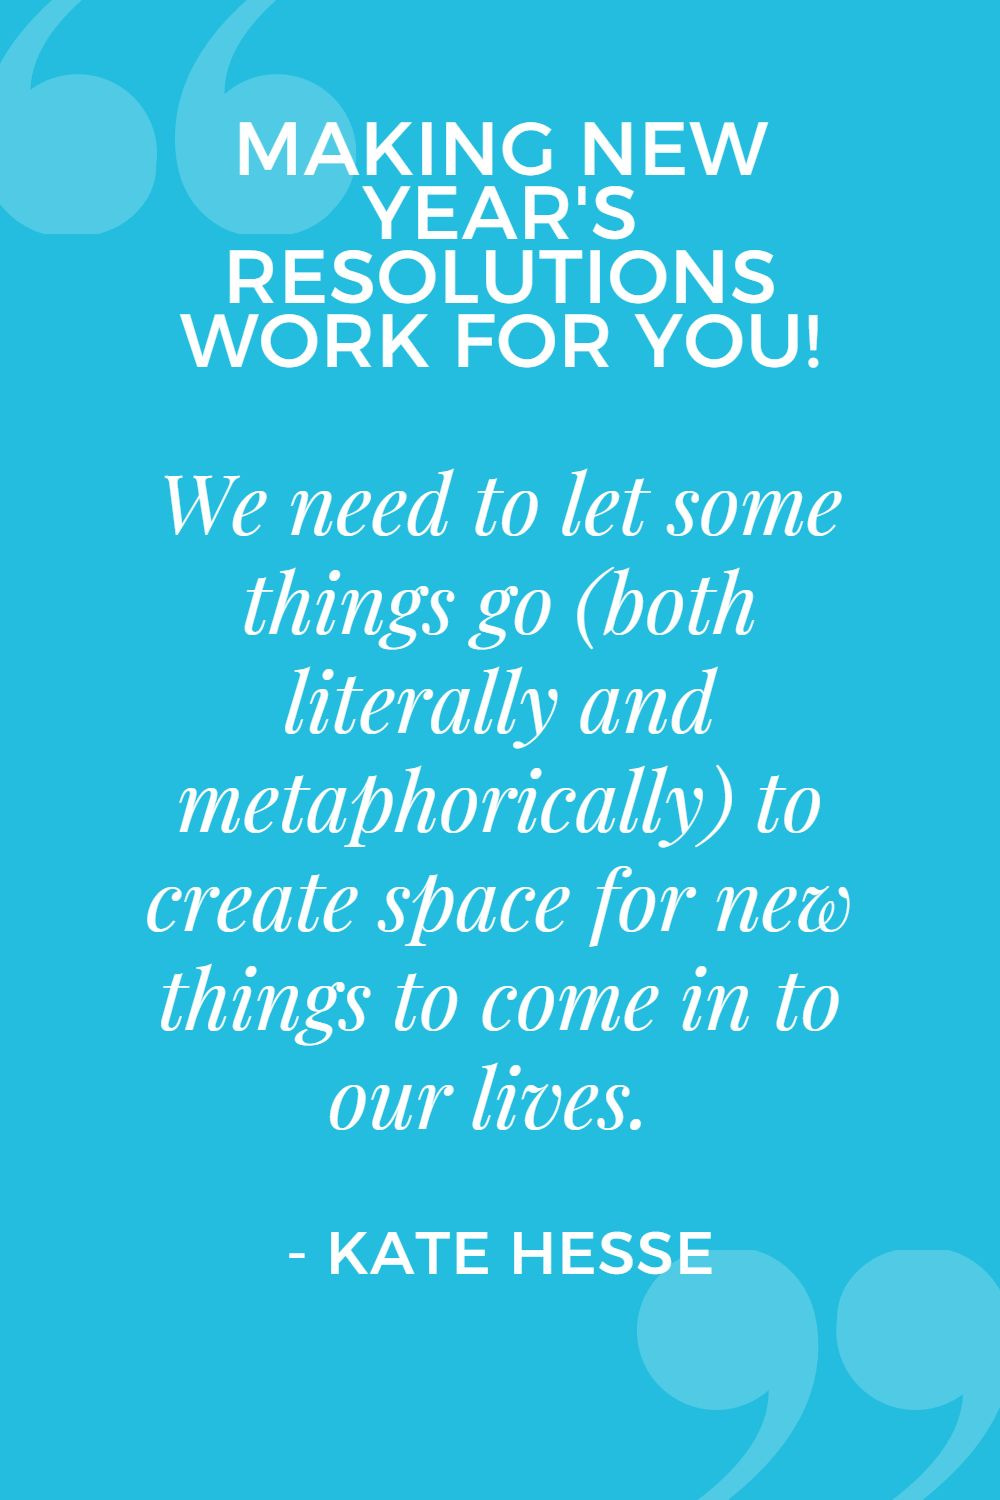 We need to let some things go (both literally and metaphorically) to create space for new things to come into our lives.